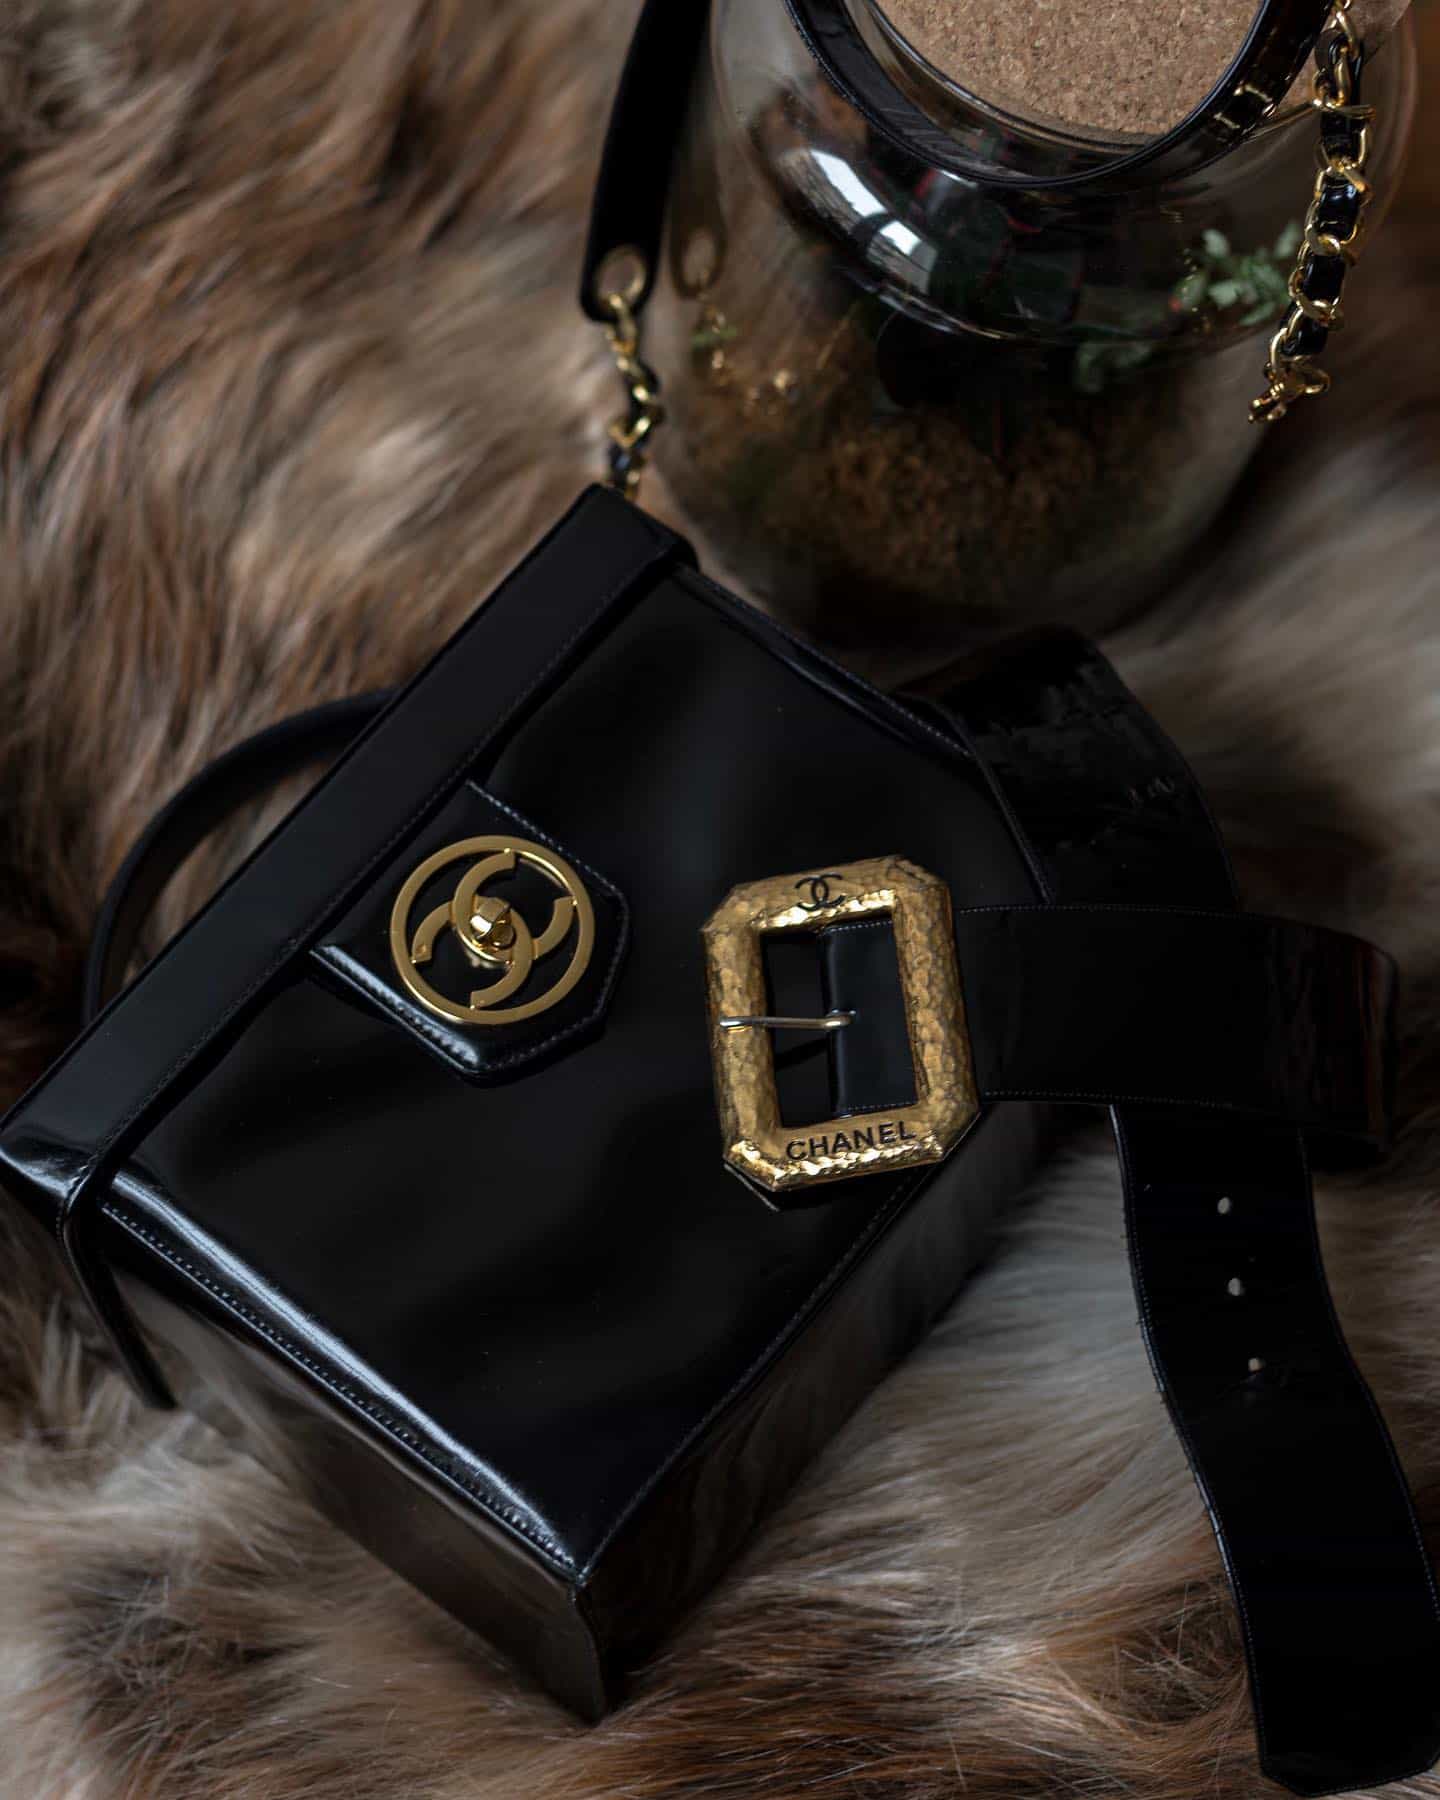 Vintage Chanel Bag  5 Things to Know Before You Buy It  Unwrapped